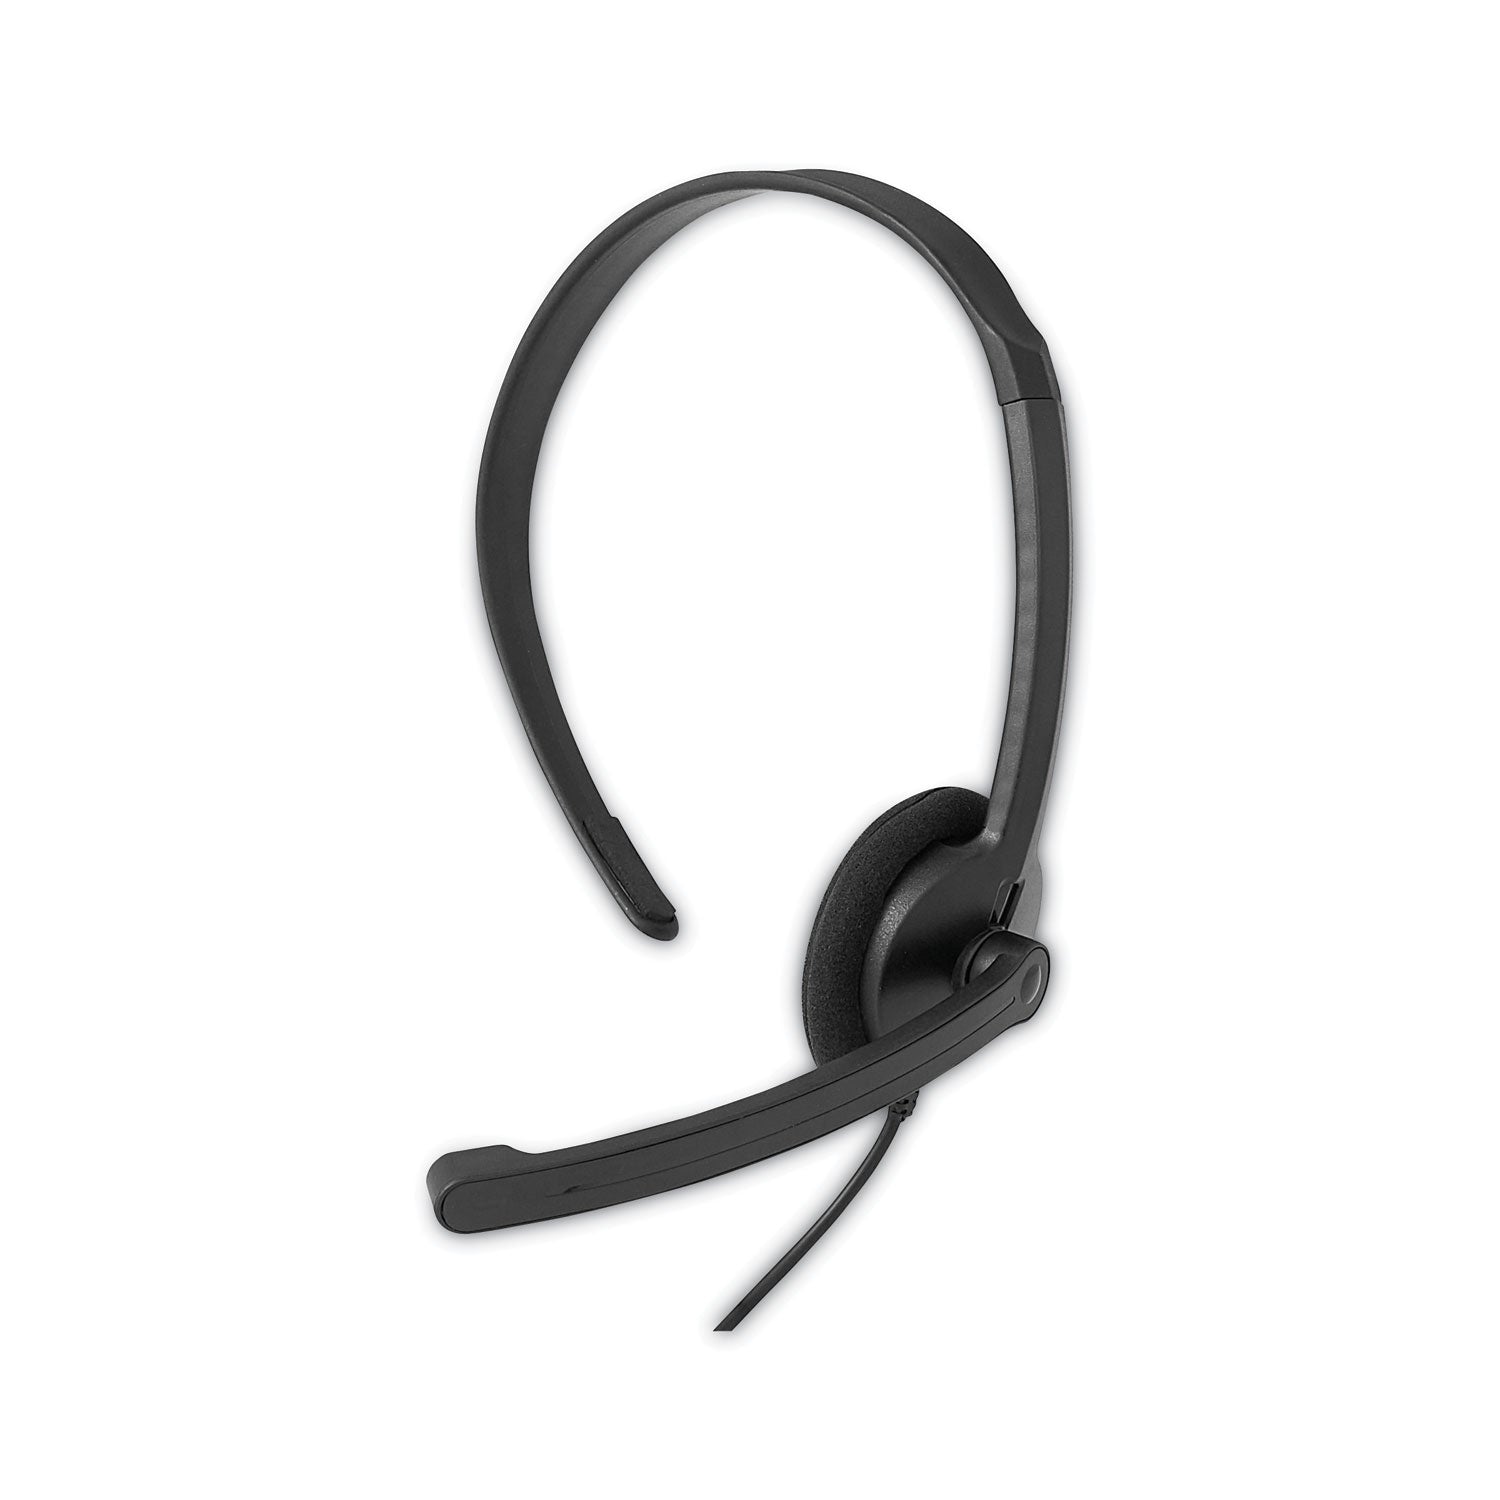 mono-headset-with-microphone-and-in-line-remote-black_ver70722 - 1